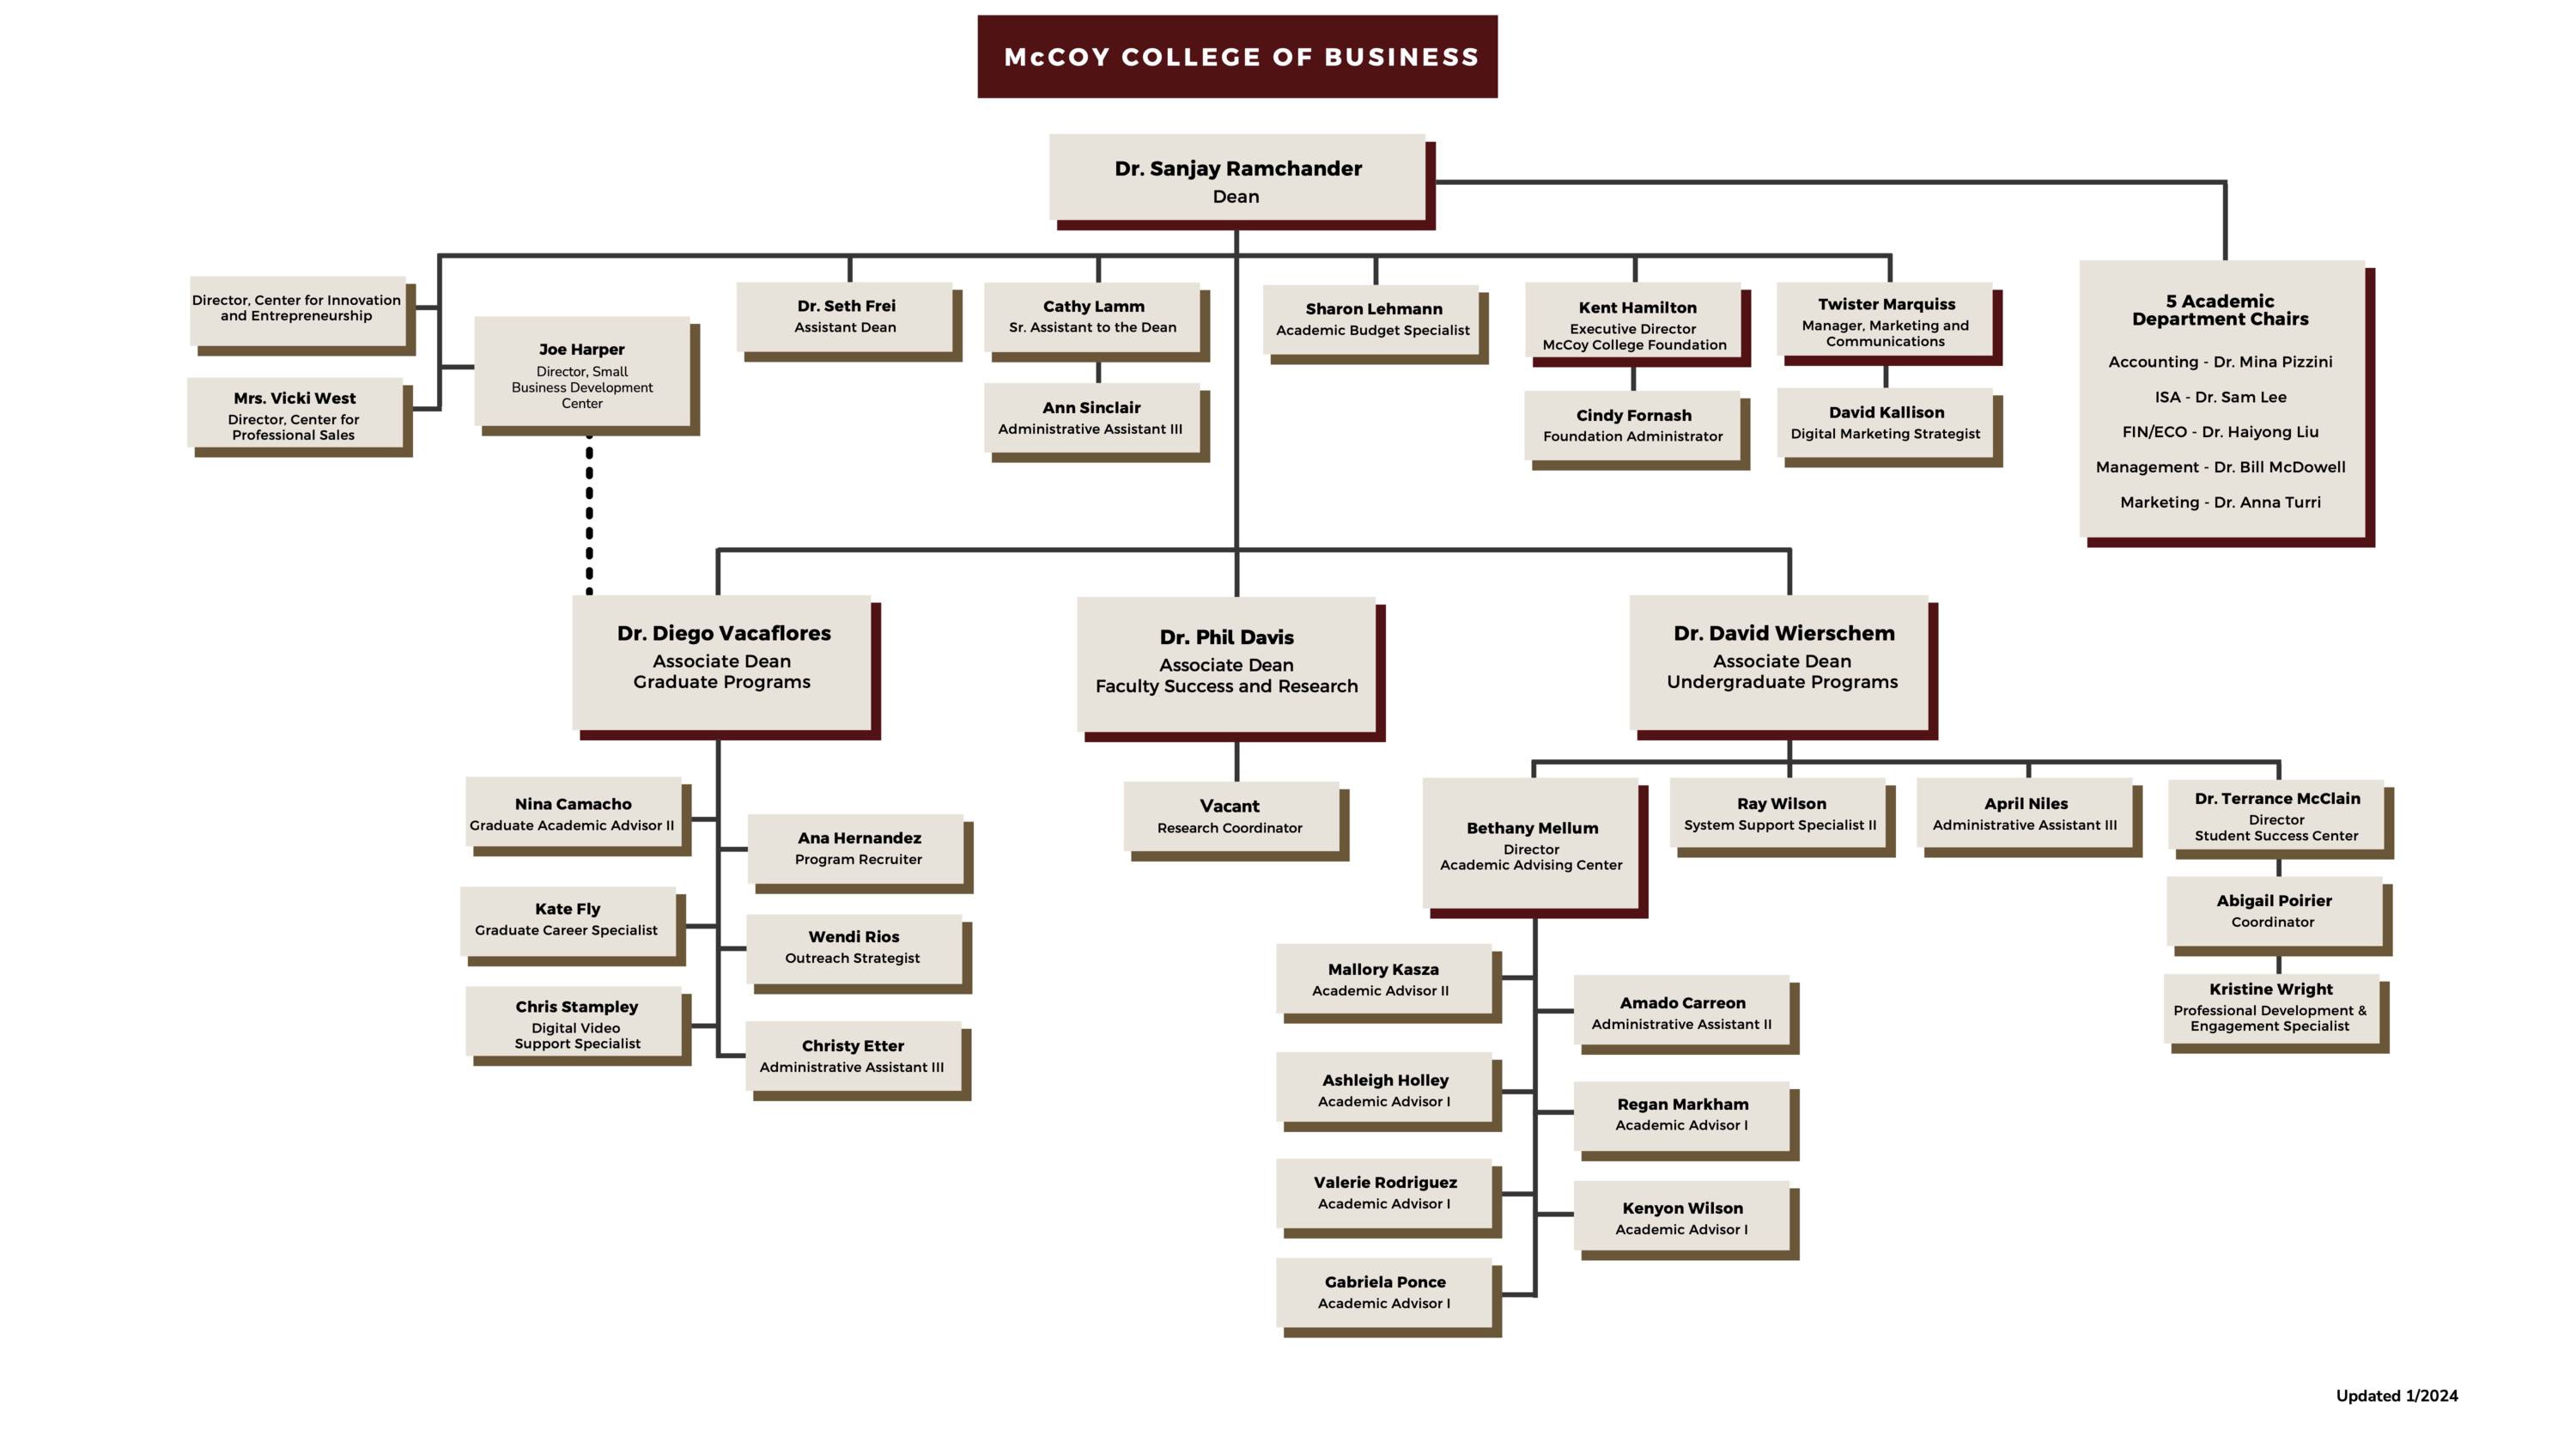 Link to text version of organizational chart